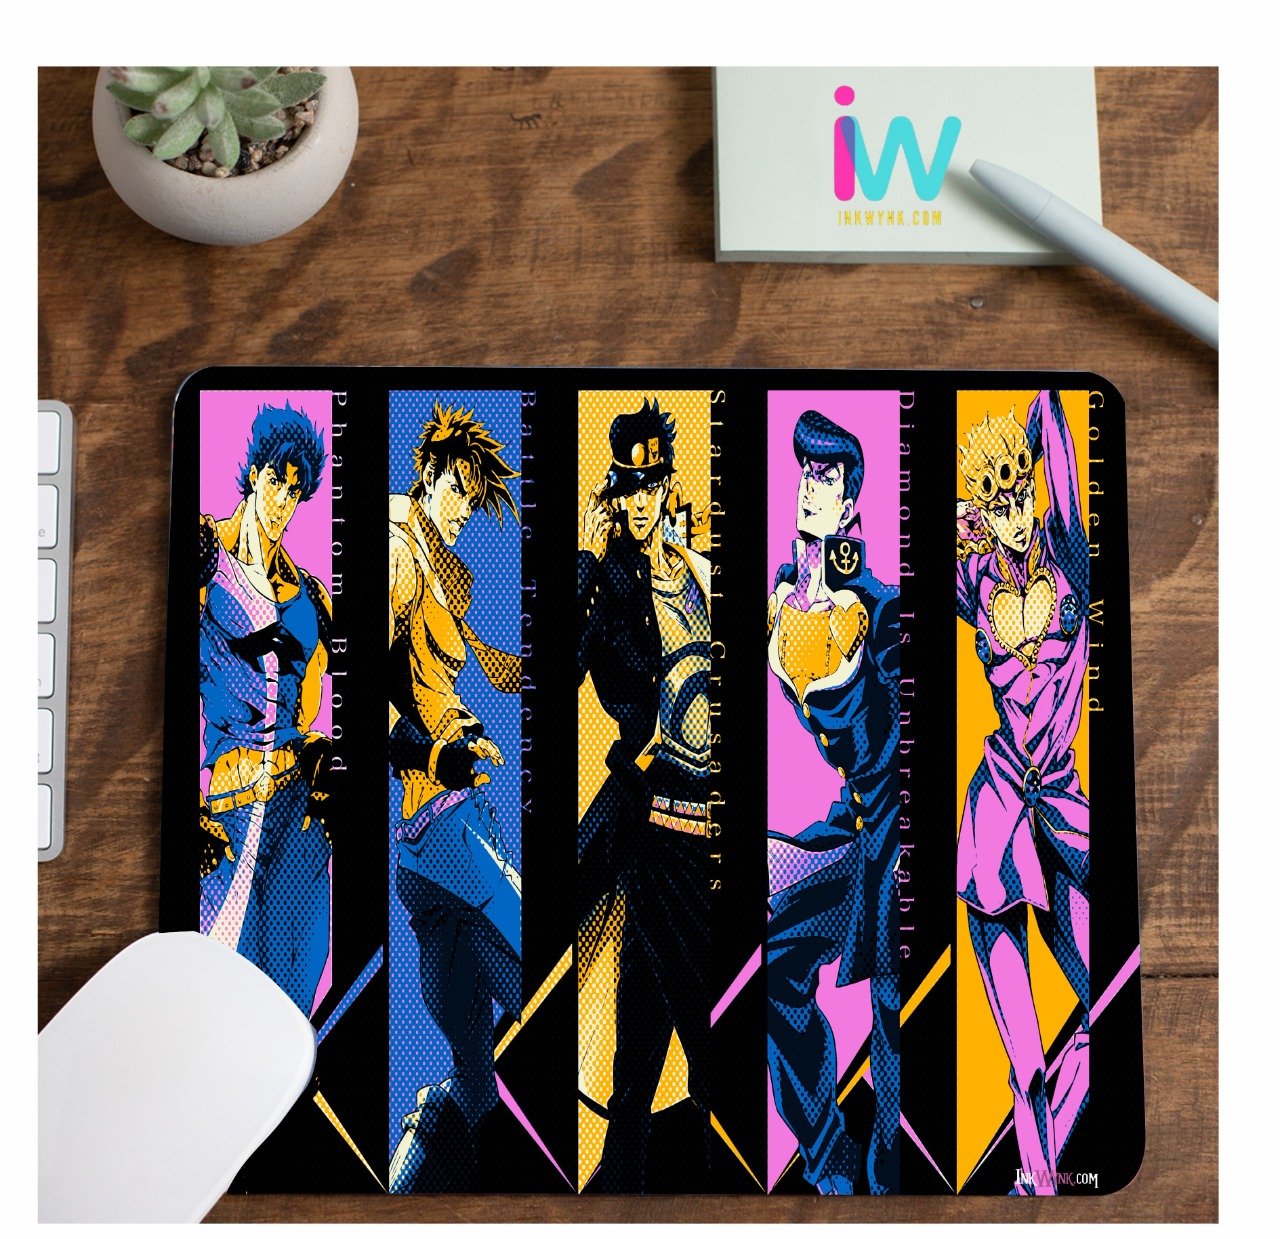 Jojo bizarre animation printed mouse pad for gamers